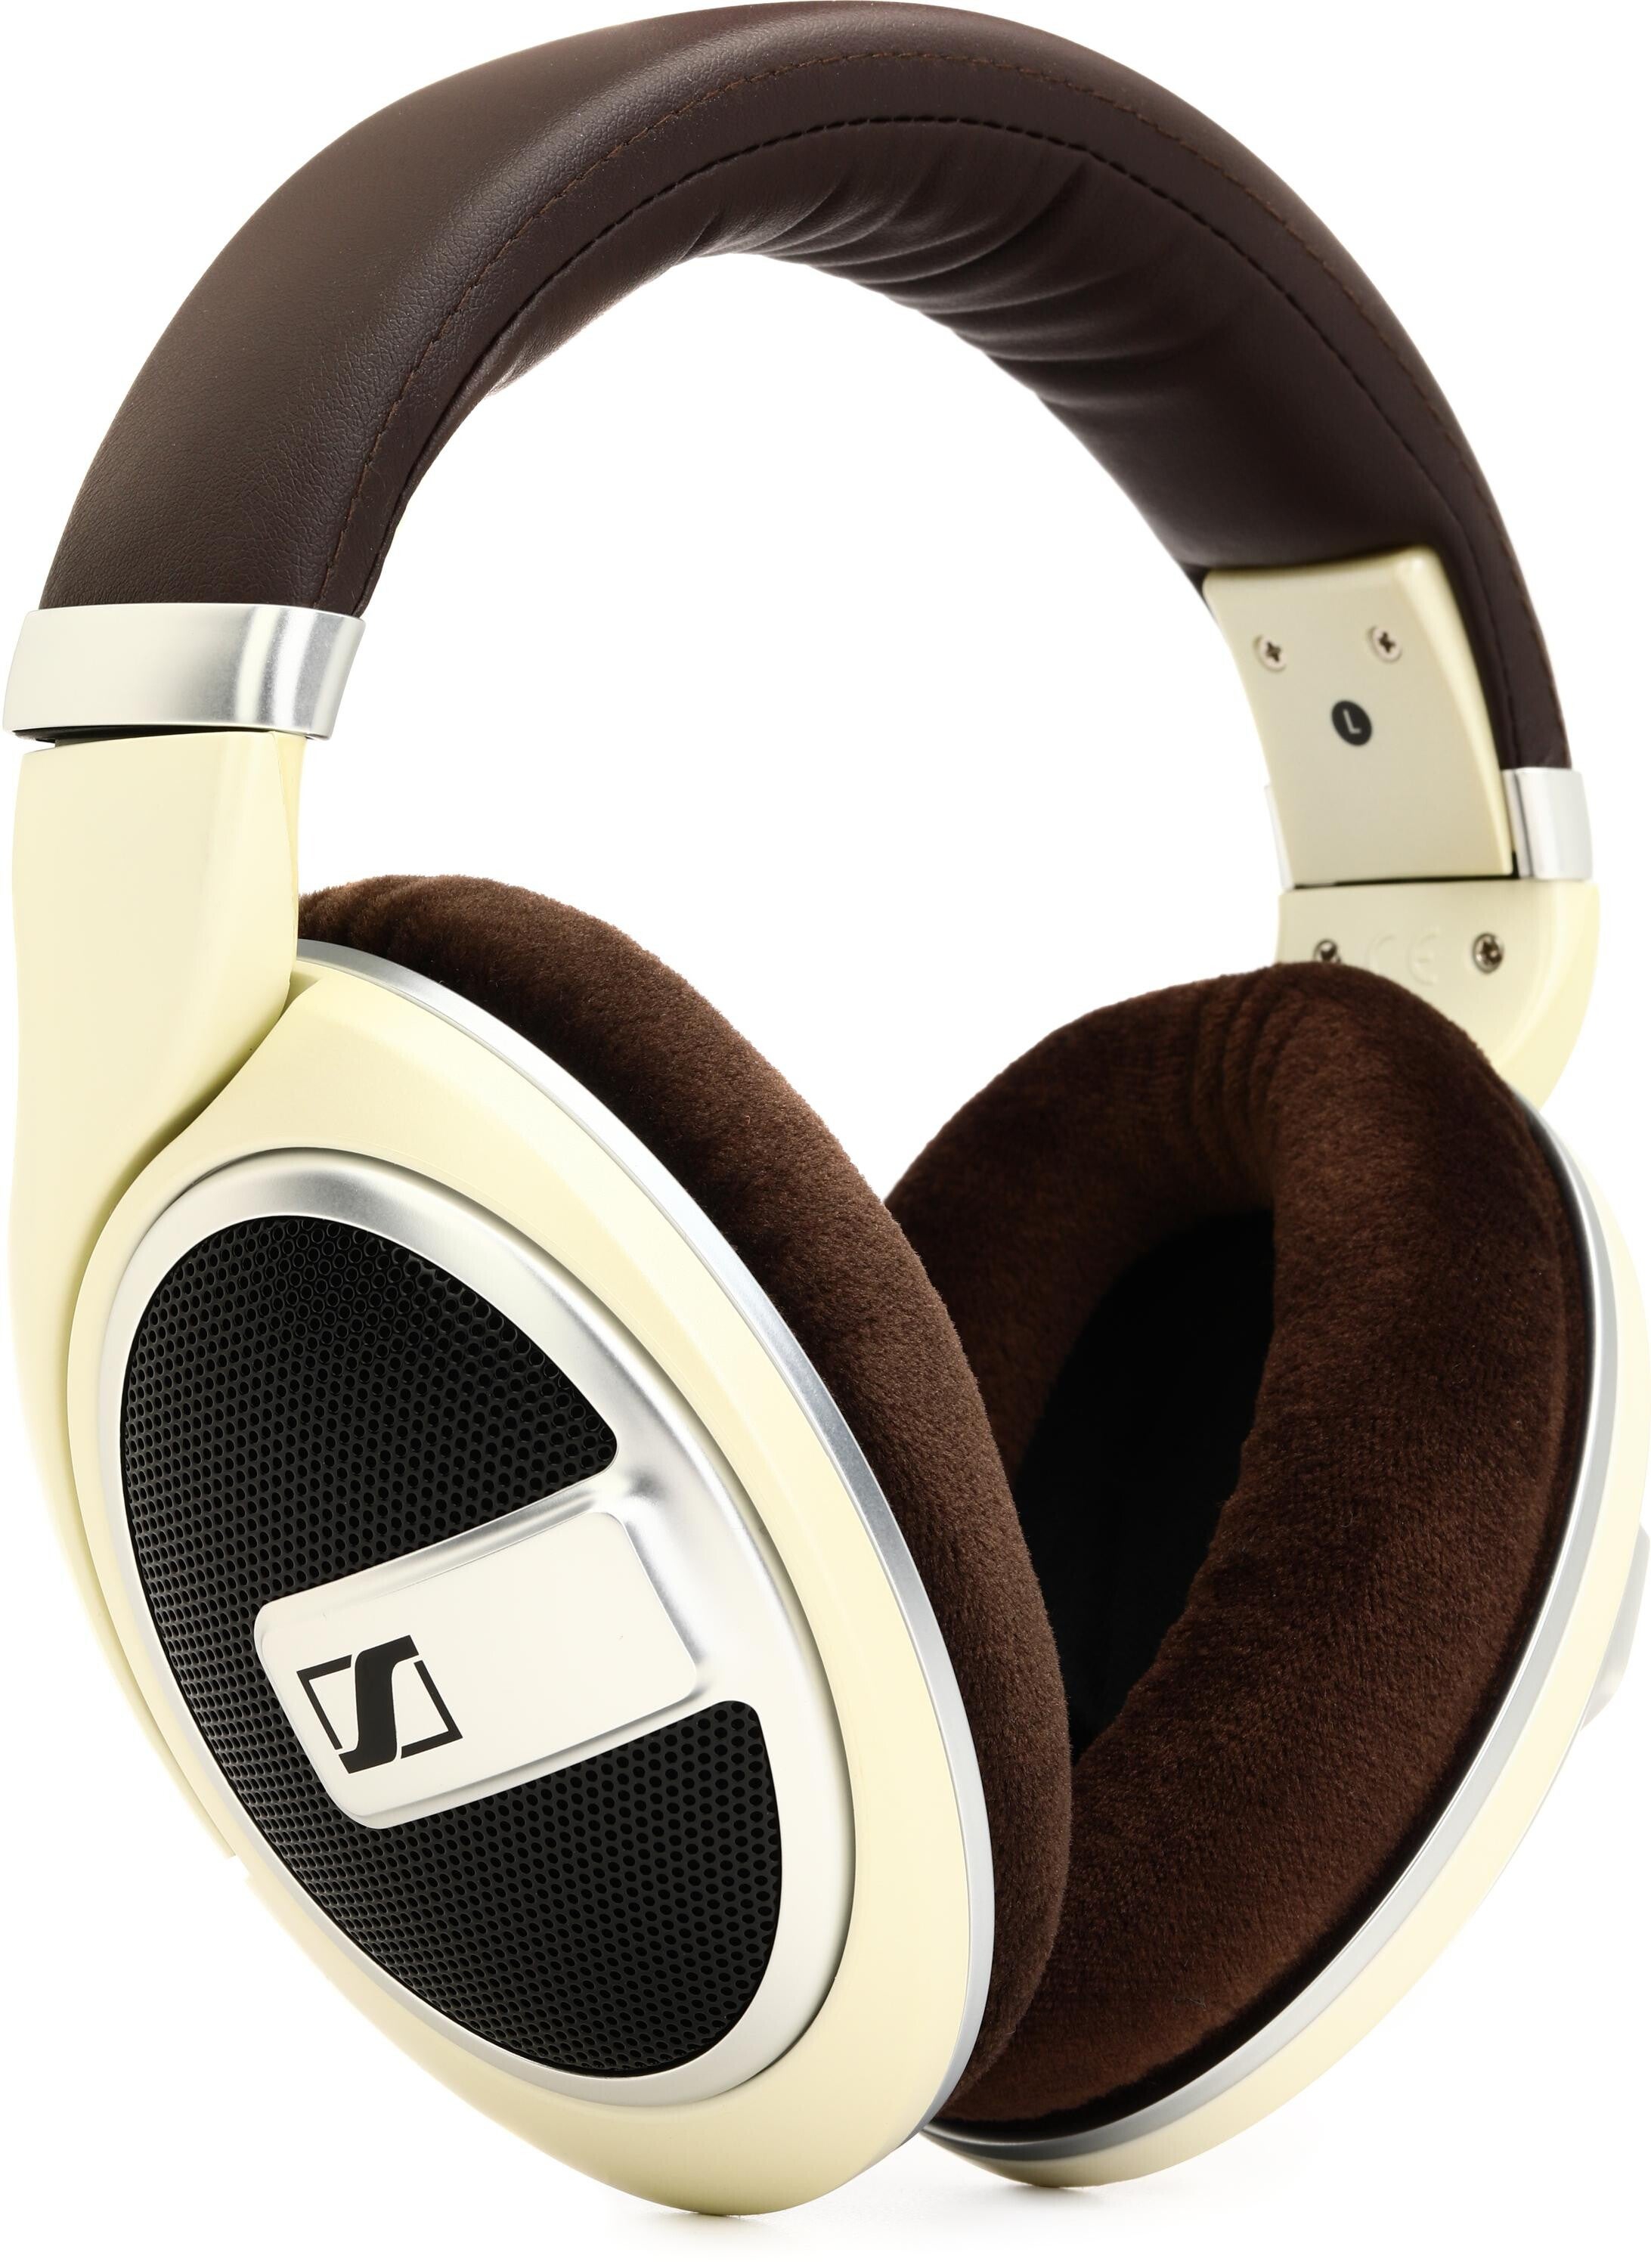 HD 599  In-Ear, Noise-Canceling, Wireless, Bluetooth, Music;  Entertainment, Travel, Sports - Sennheiser Discover True Sound